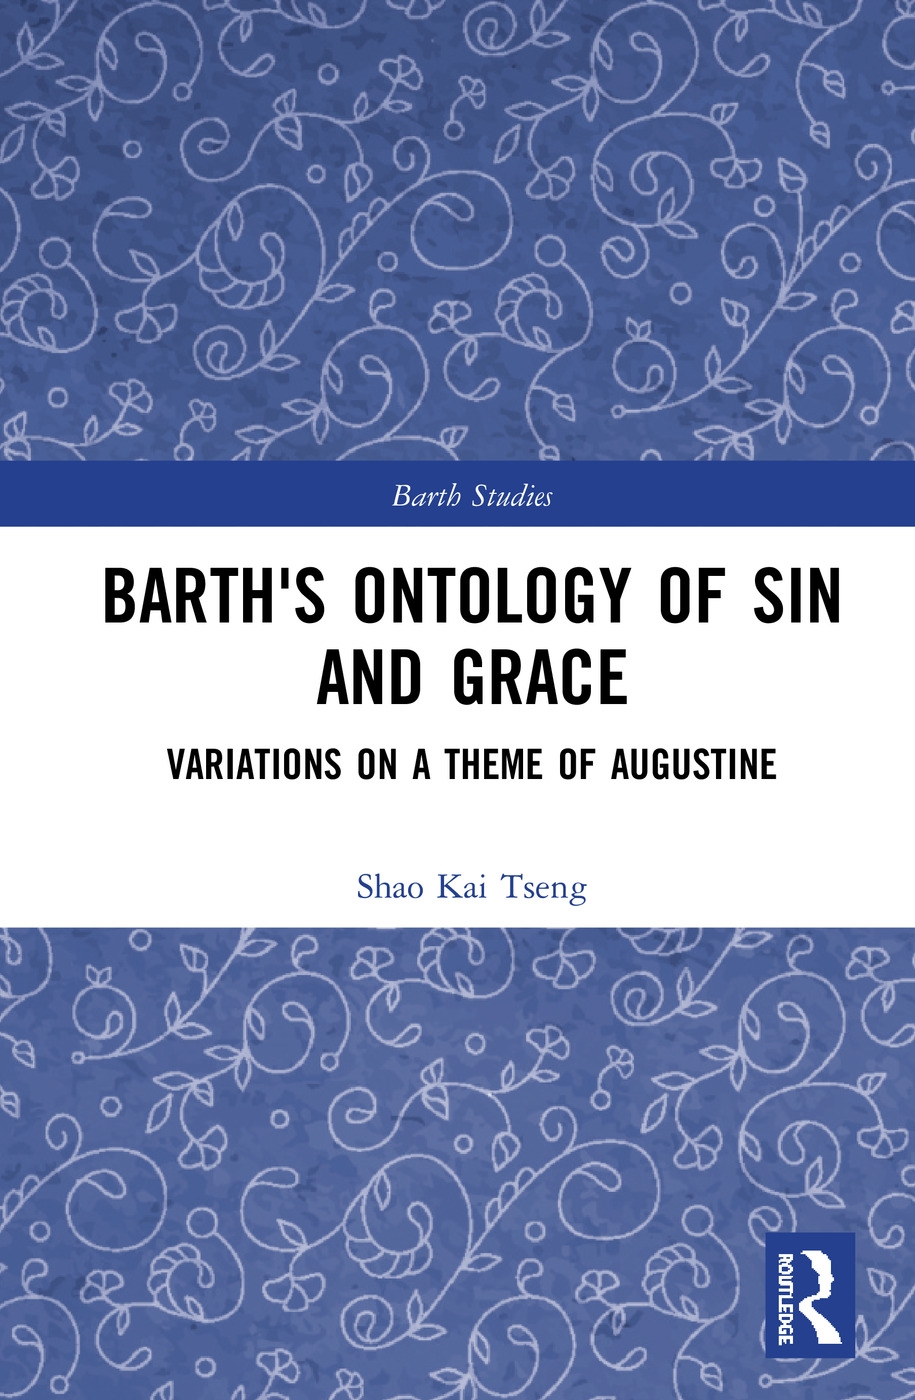 Barth’s Ontology of Sin and Grace: Variations on a Theme of Augustine